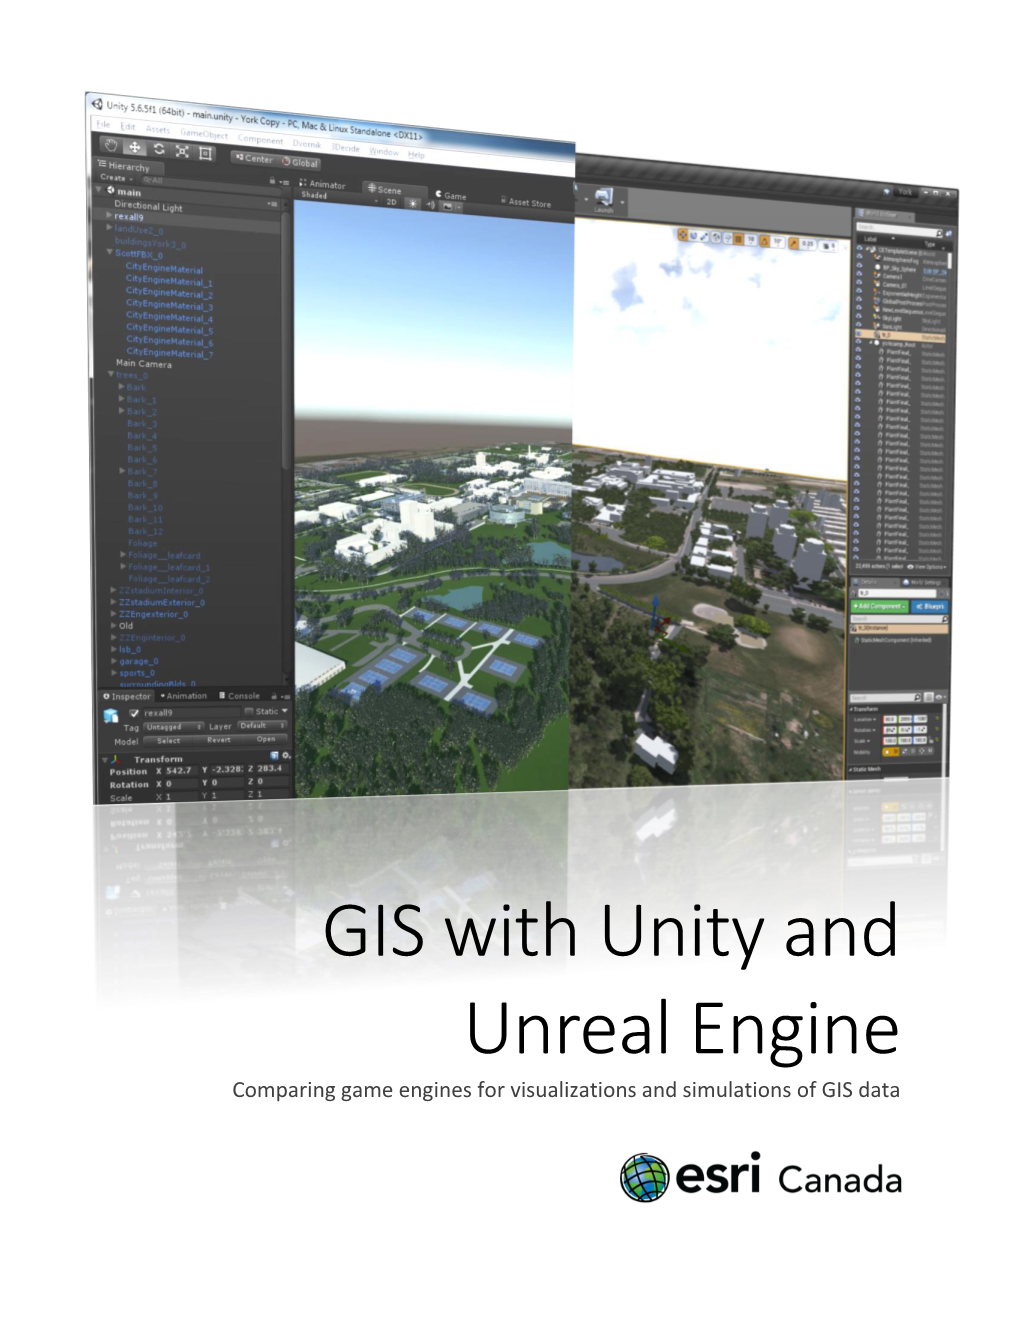 GIS with Unity and Unreal Engine Comparing Game Engines for Visualizations and Simulations of GIS Data